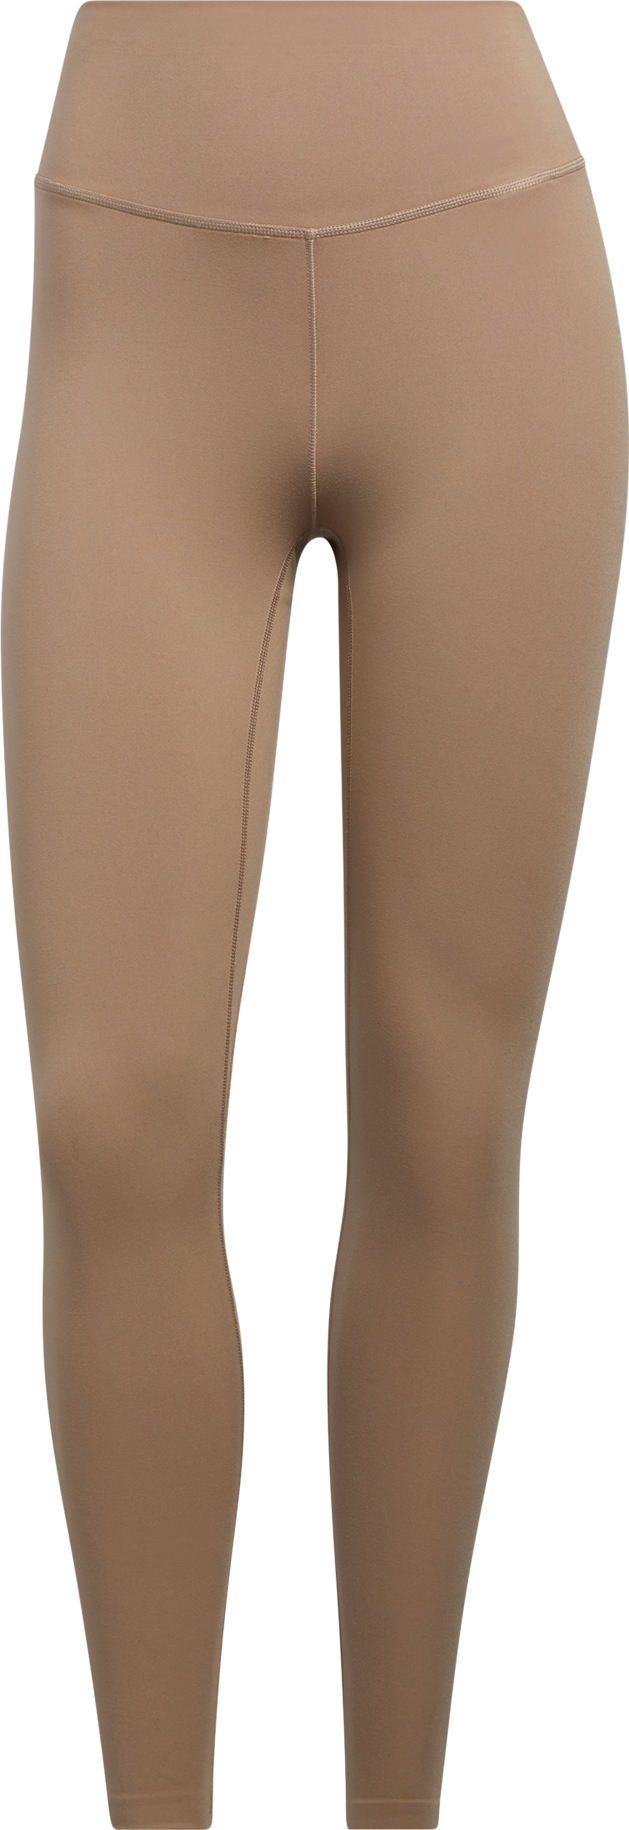 Adidas Women’s Yoga Luxe Studio 7/8 Tight Chalky Brown